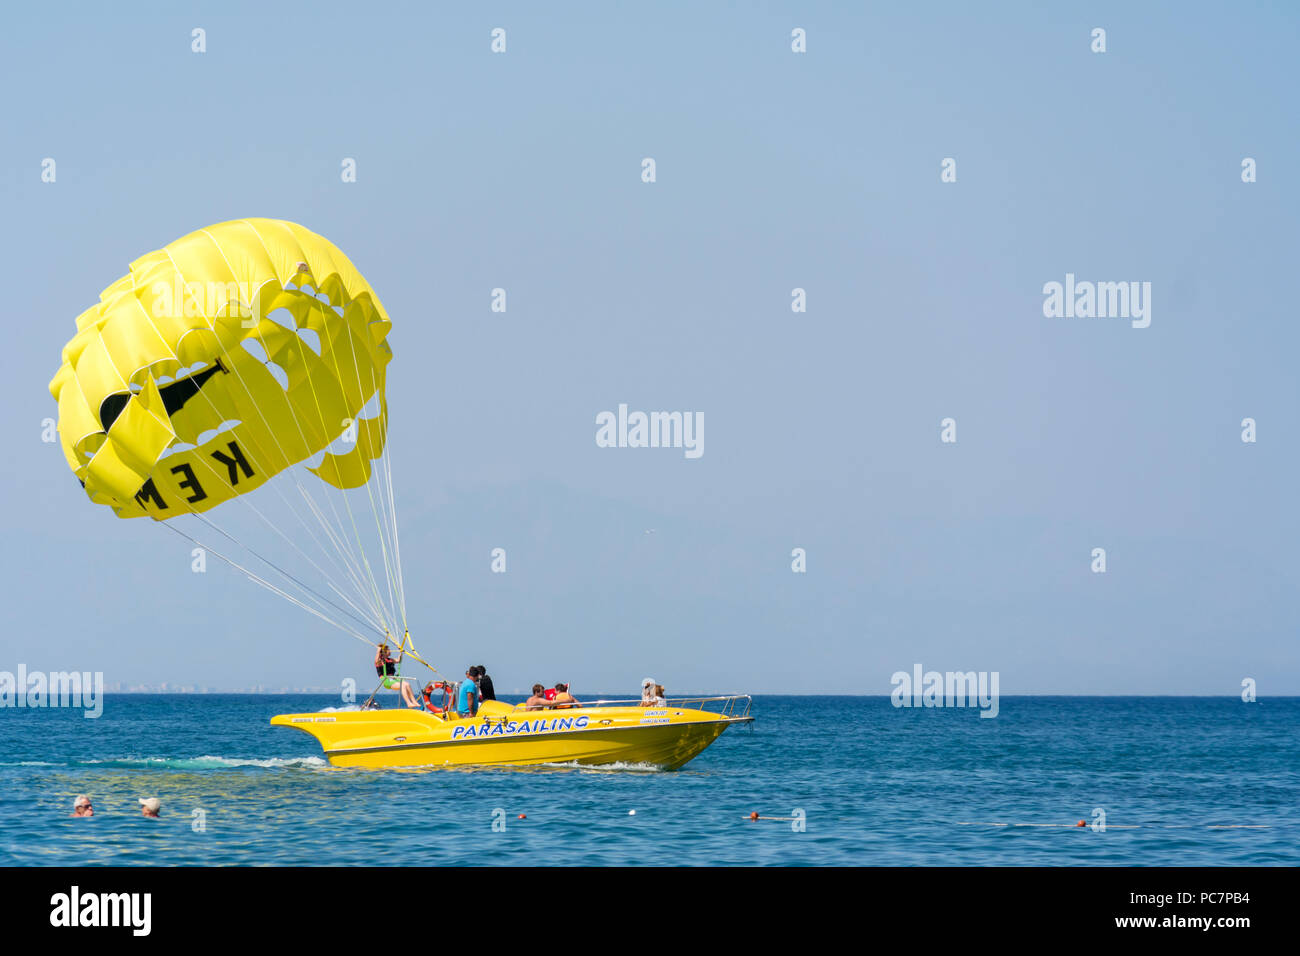 An adventure seeking holiday maker about to take off by parachute for some parasailing fun behind a purpose built speed boat. Stock Photo